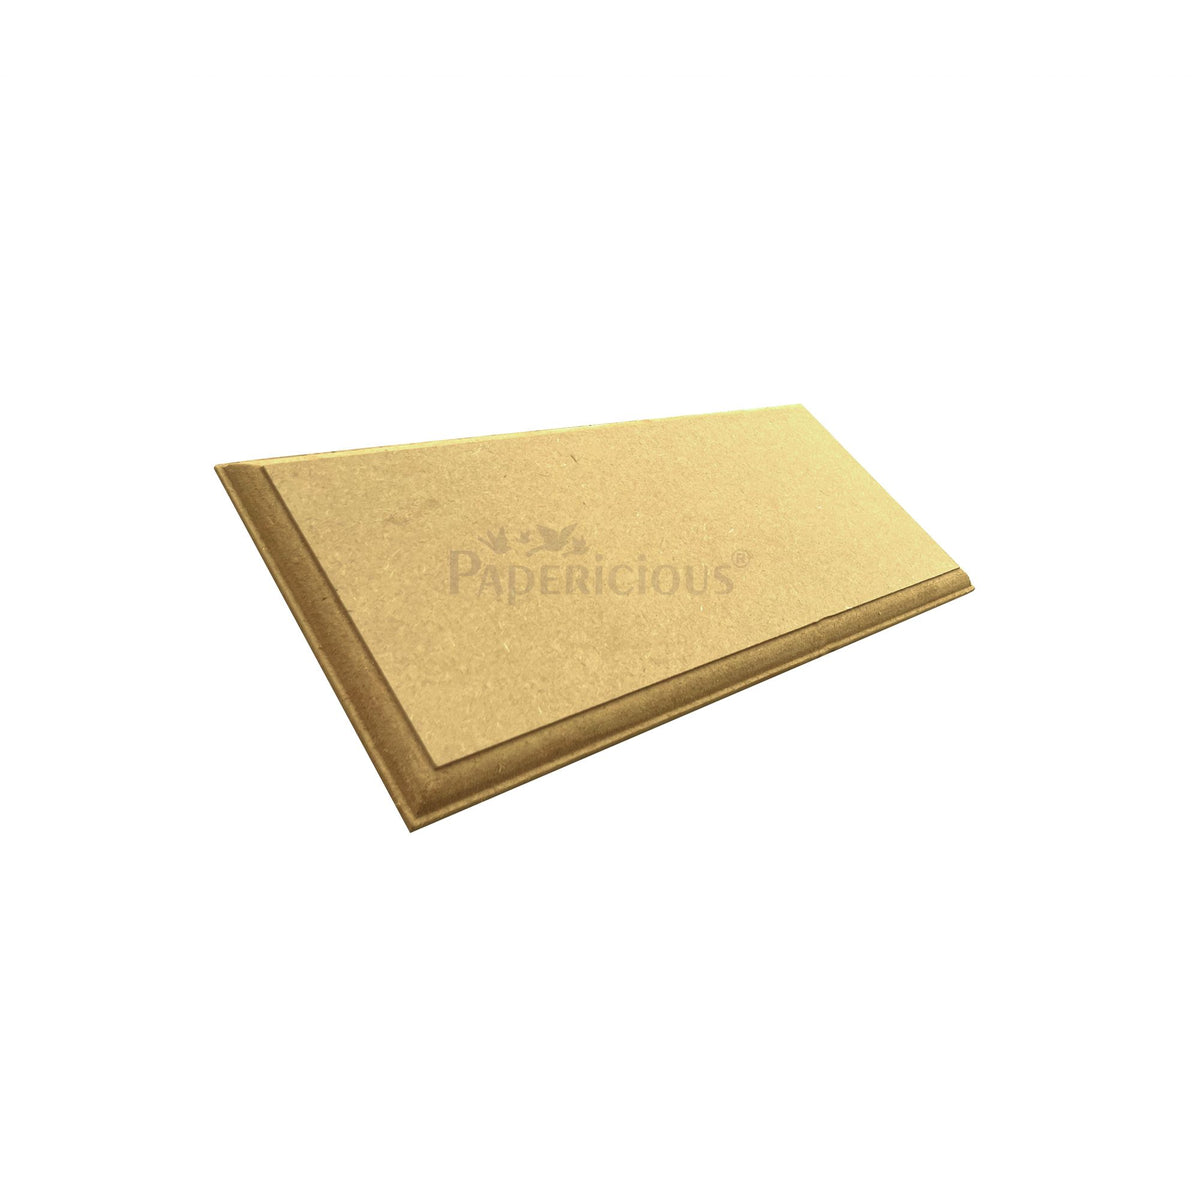 PAPERICIOUS MDF Rectangular Base - 12 mm thick